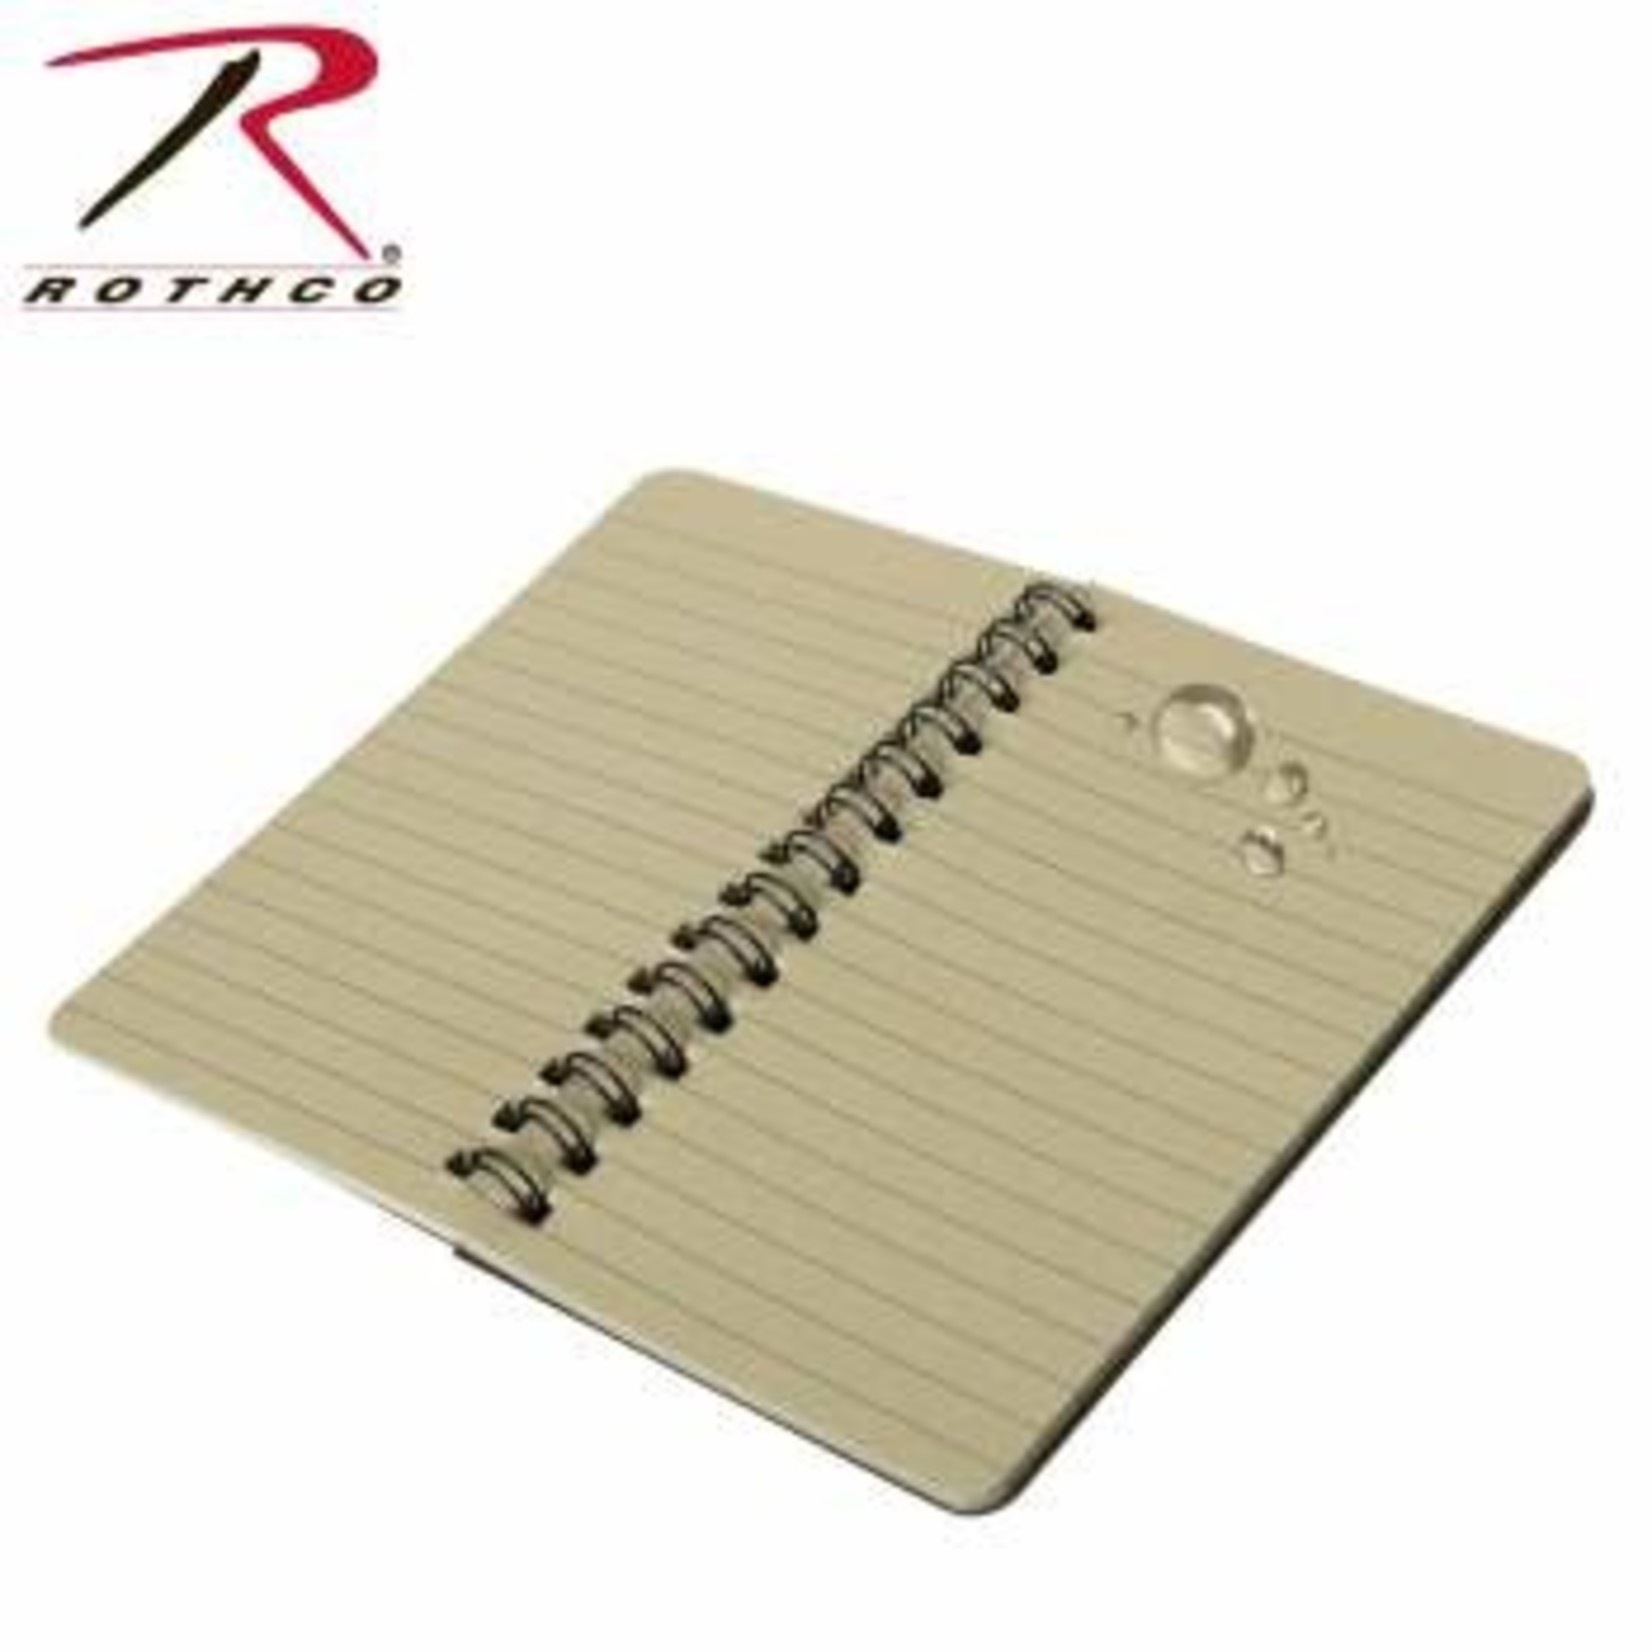 Rothco Rothco All-Weather Waterproof Notebook